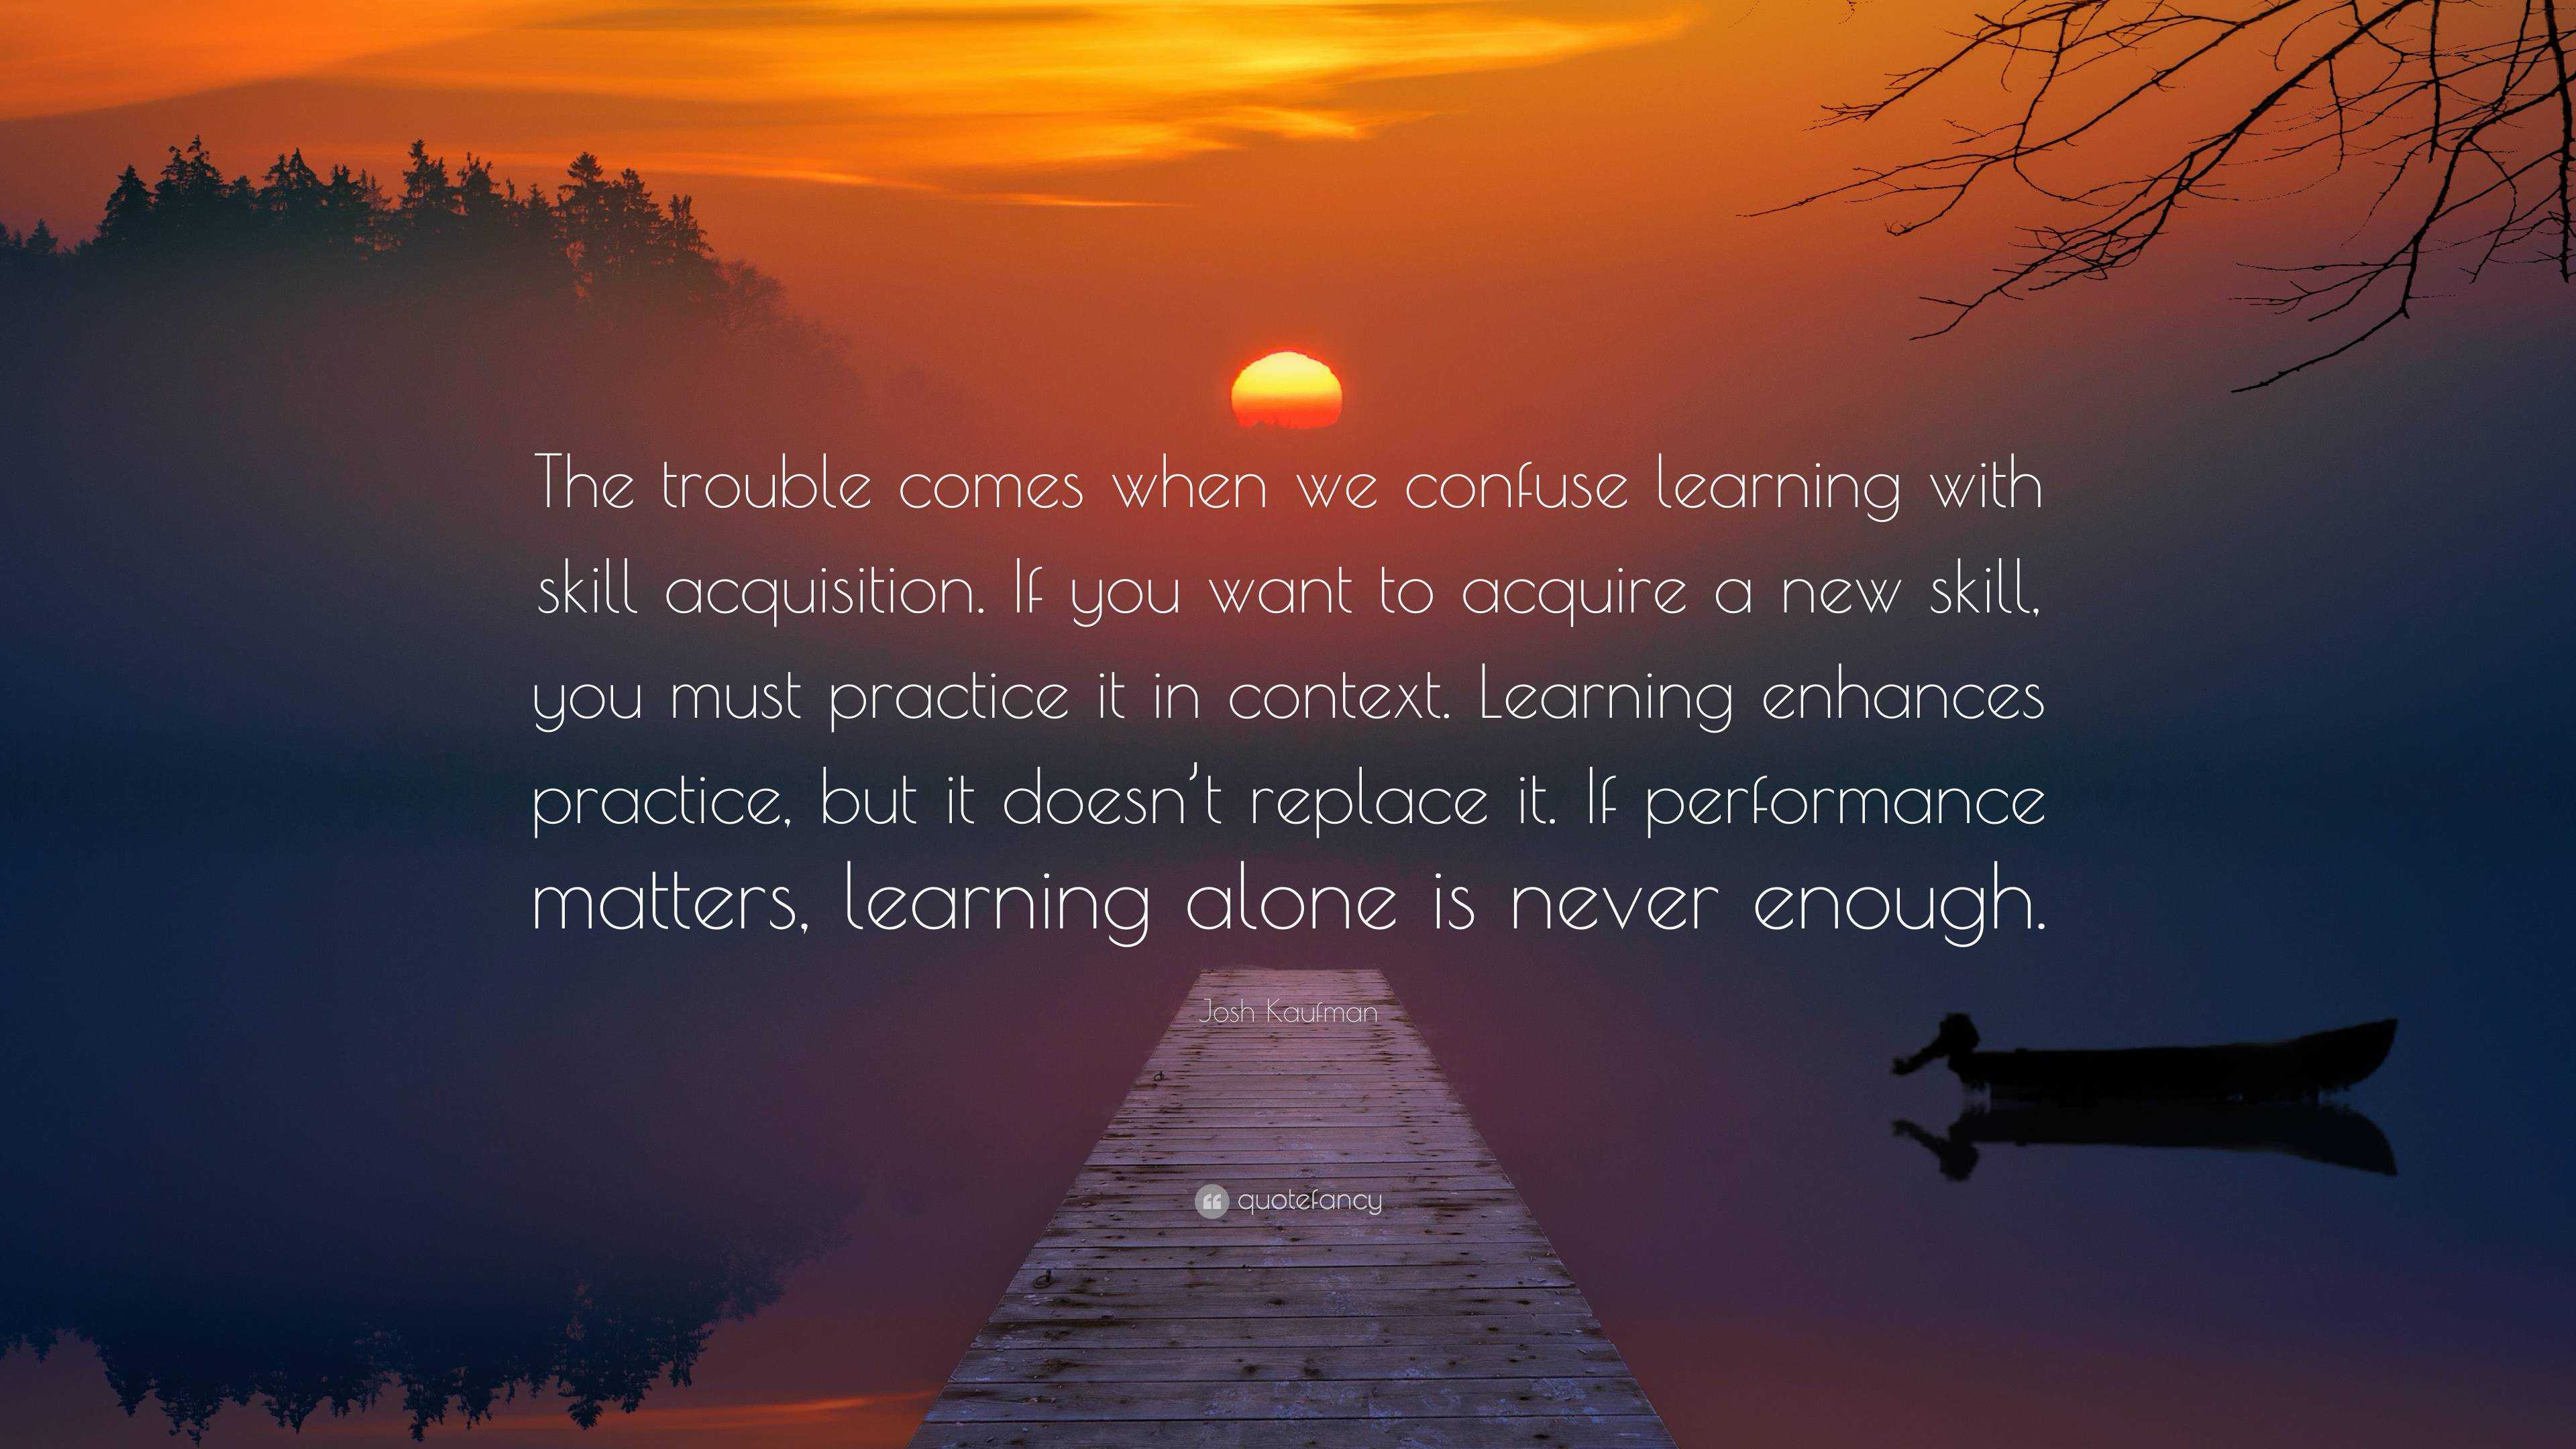 Josh Kaufman Quote: “The trouble comes when we confuse learning with ...